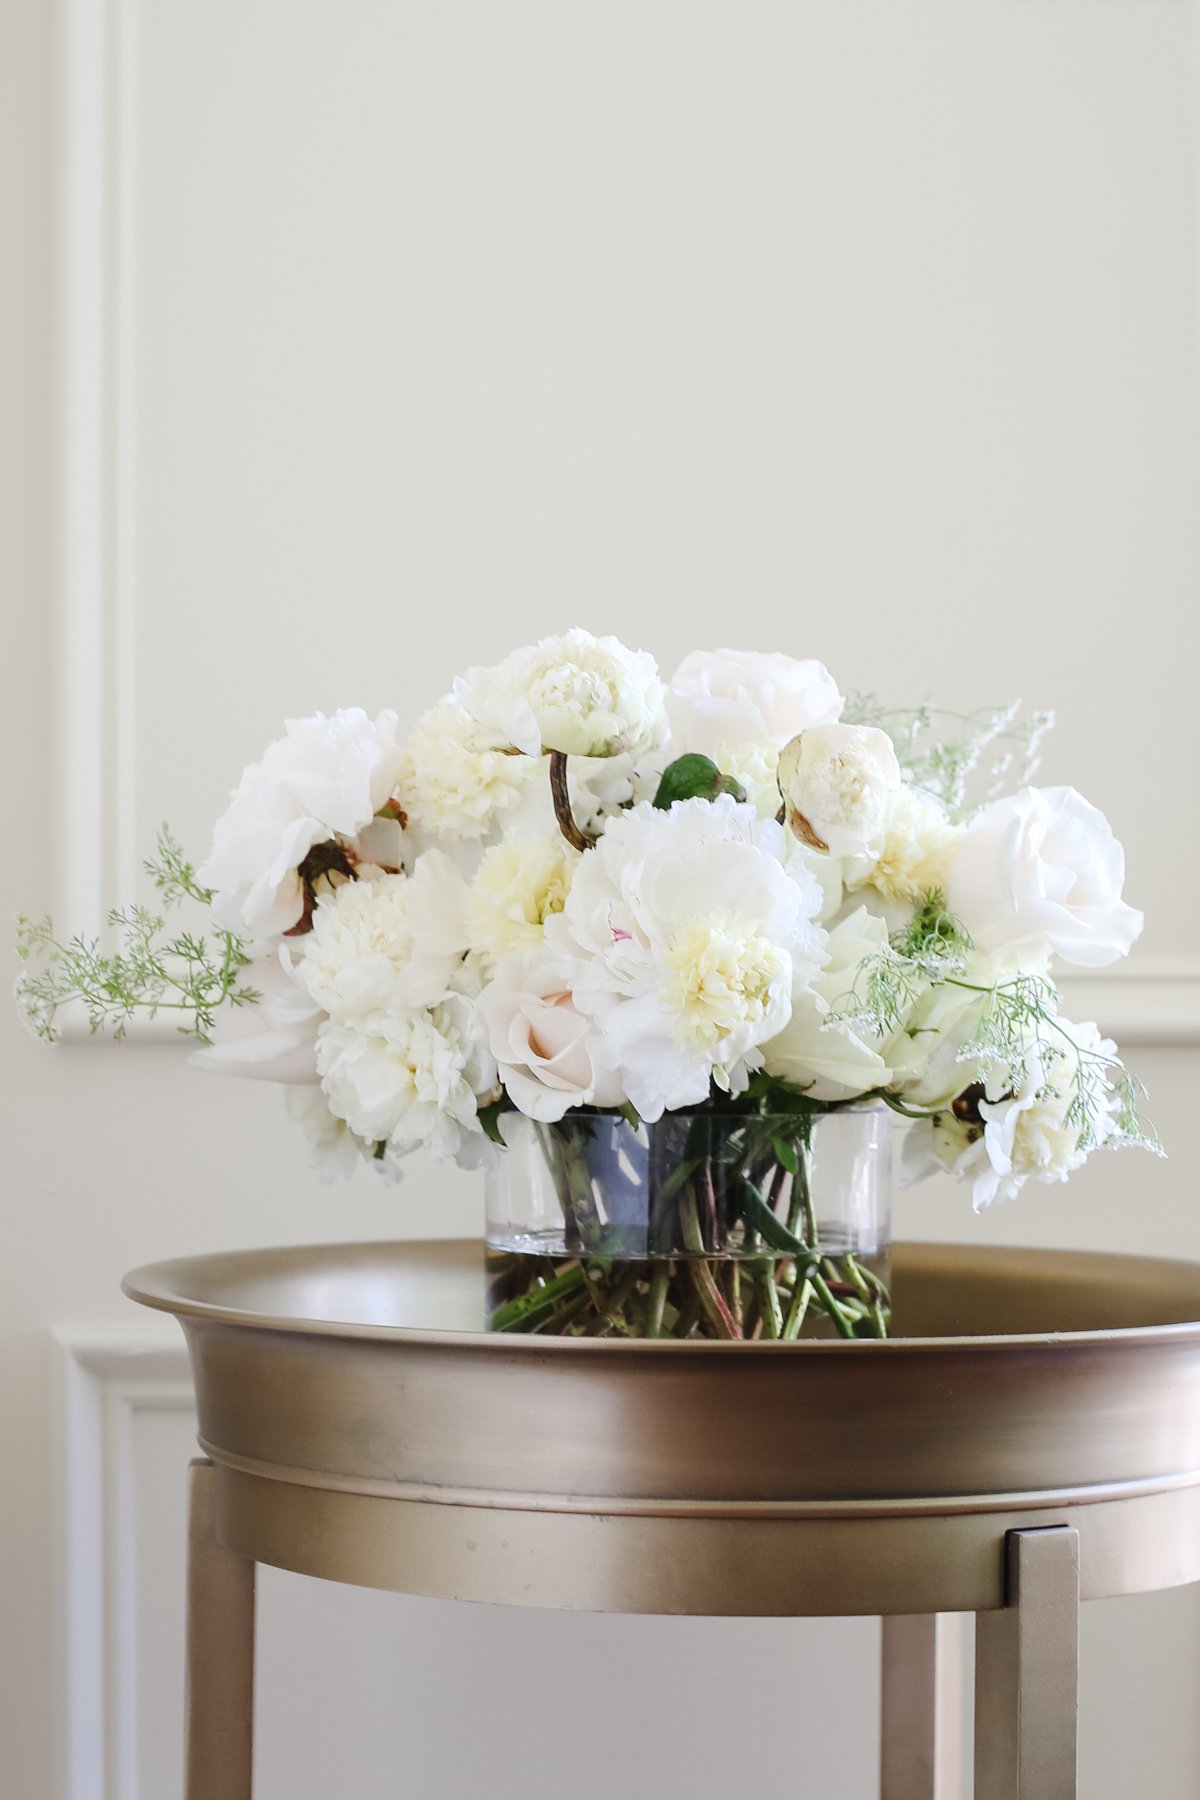 White peony flowers in a glass vase on a gold table.